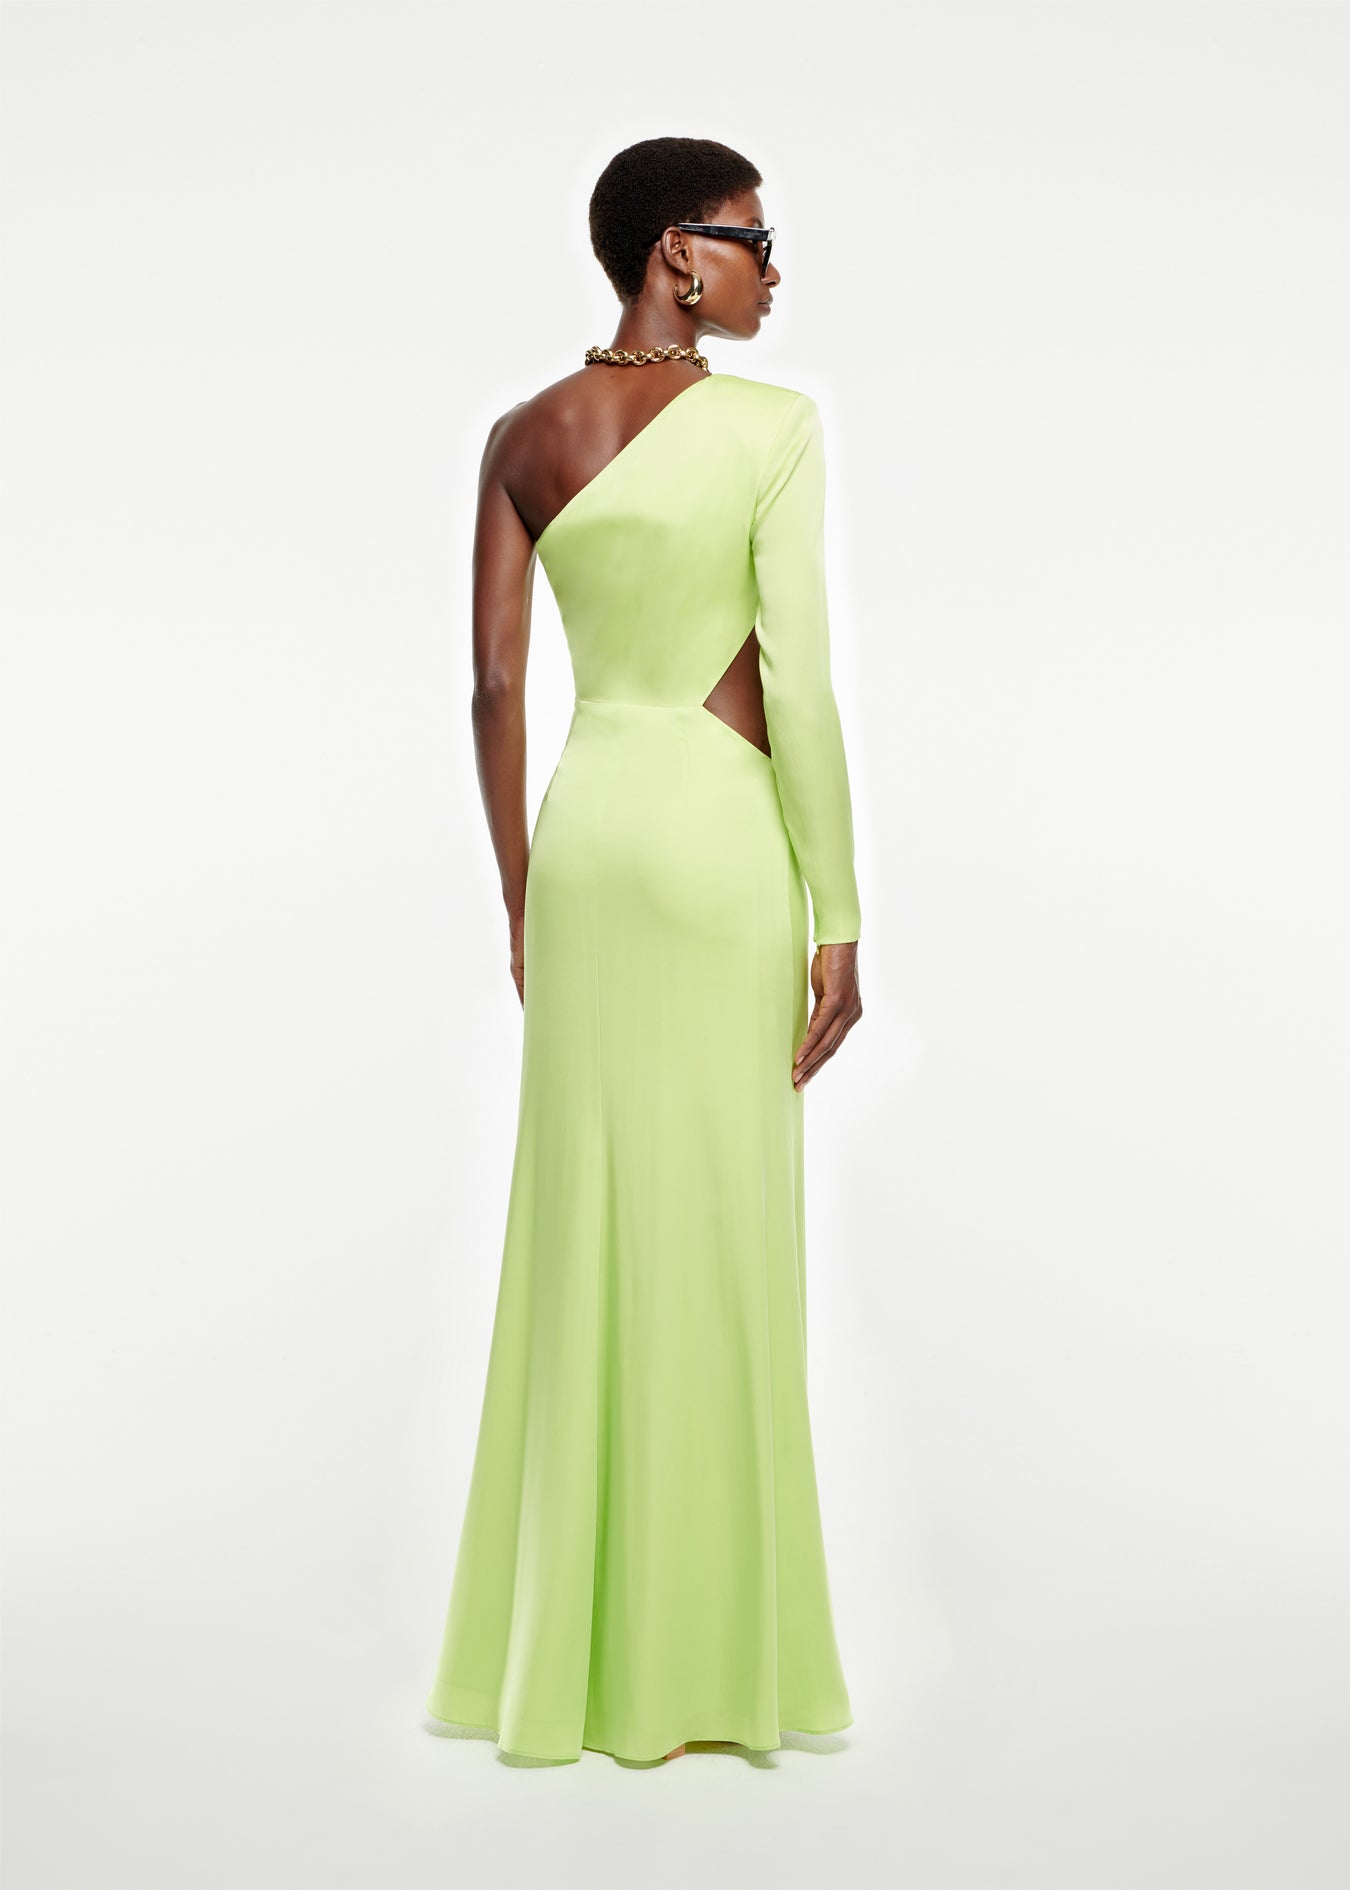 The back of a woman wearing the Asymmetric Stretch Silk Crepe Gown in Green